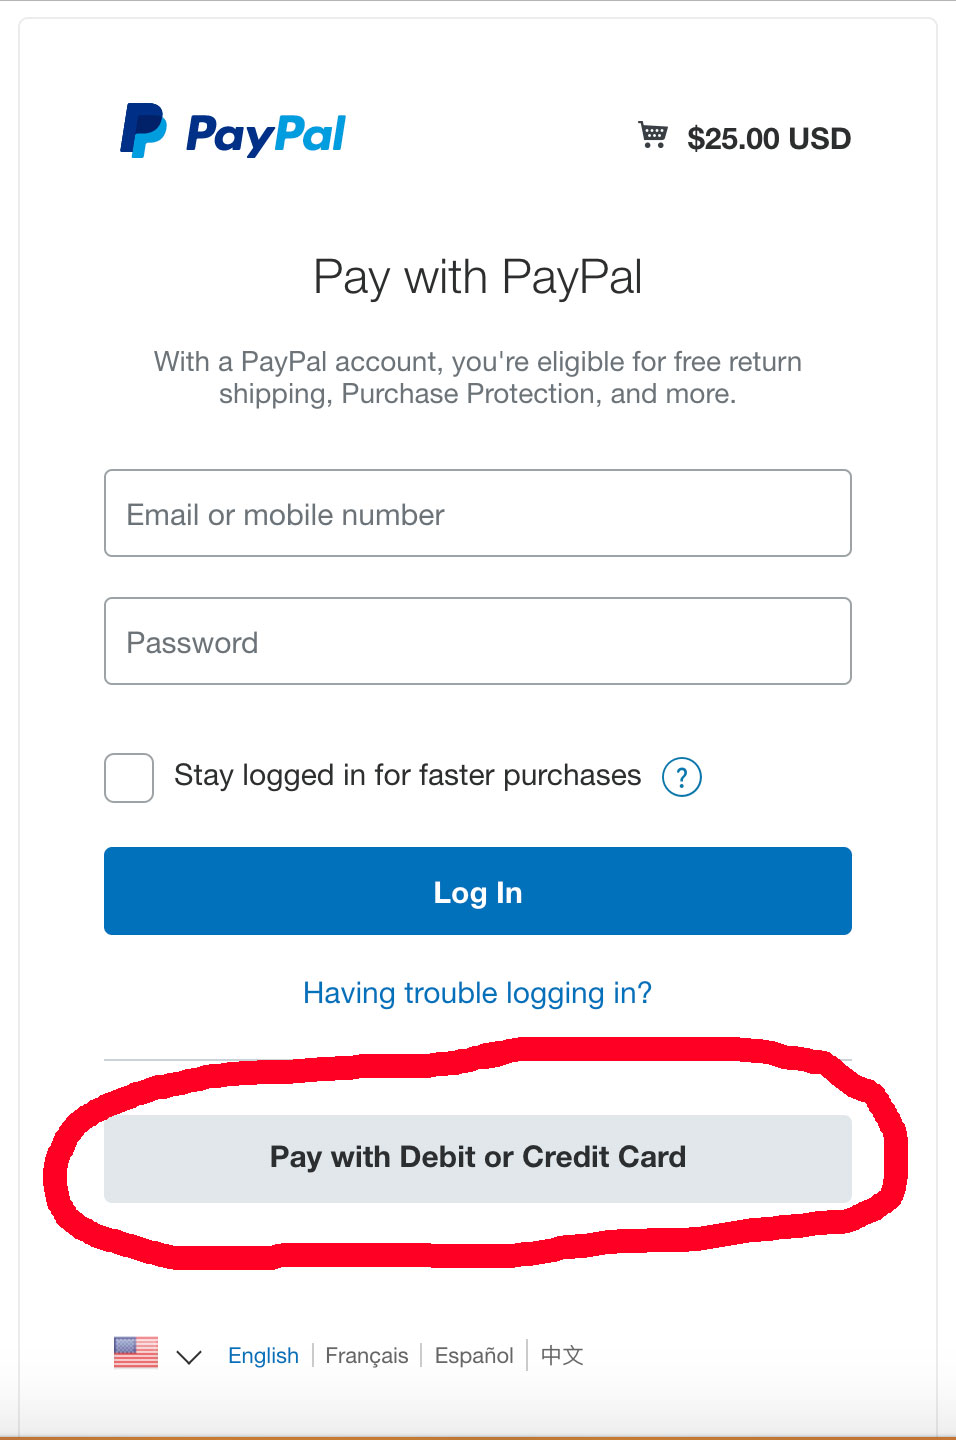 Click "Pay with credit or debit card" if you don't want to log into PayPal to pay for your membership.